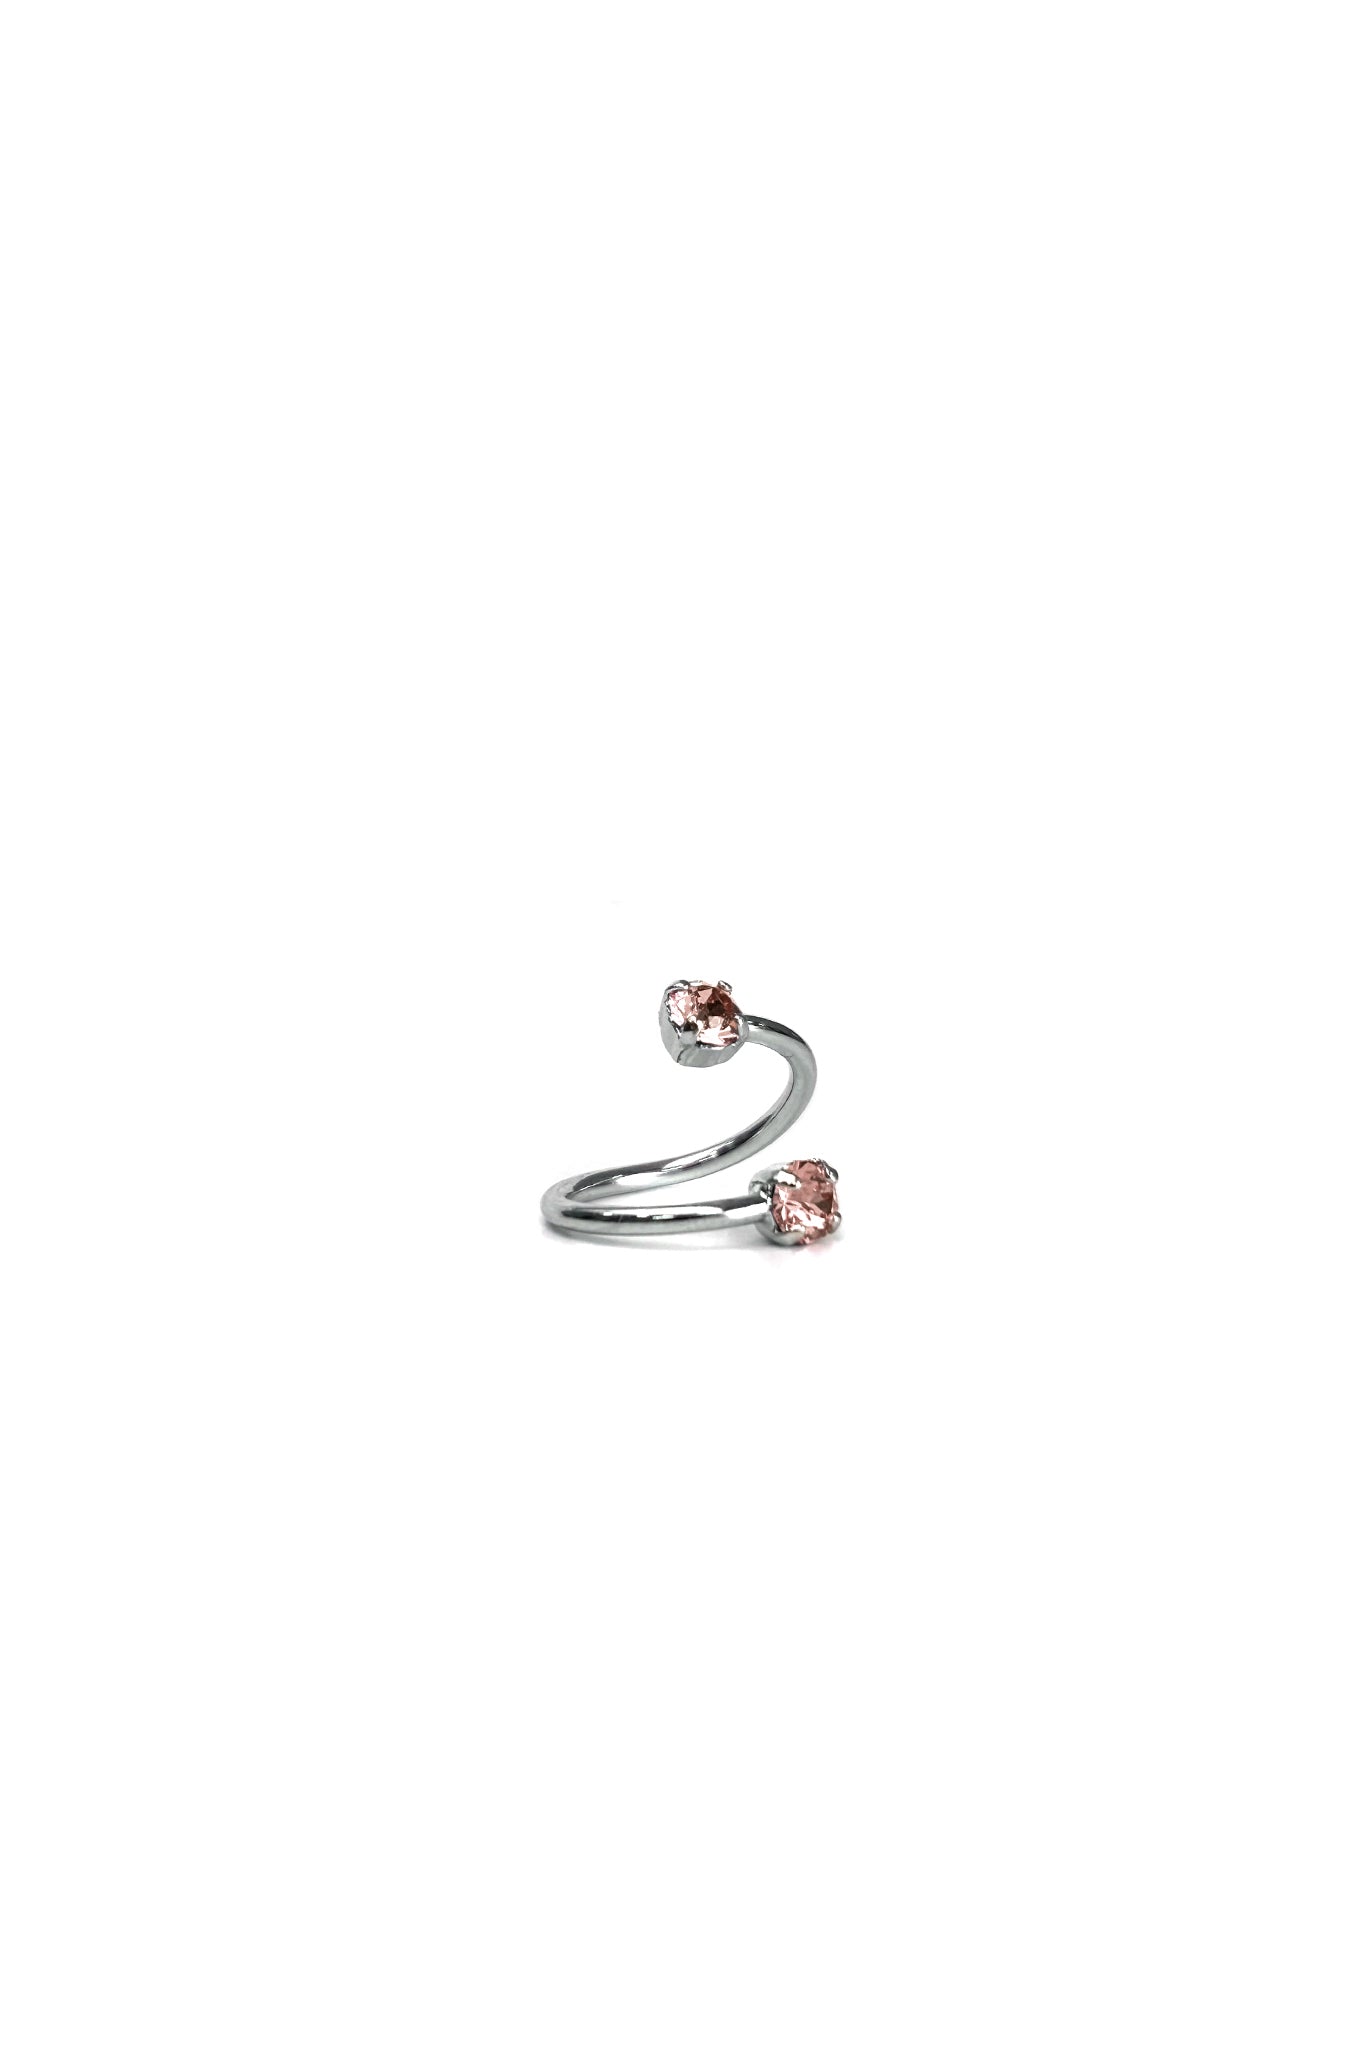 Justine Clenquet Juno Mid Ring, Light Pink